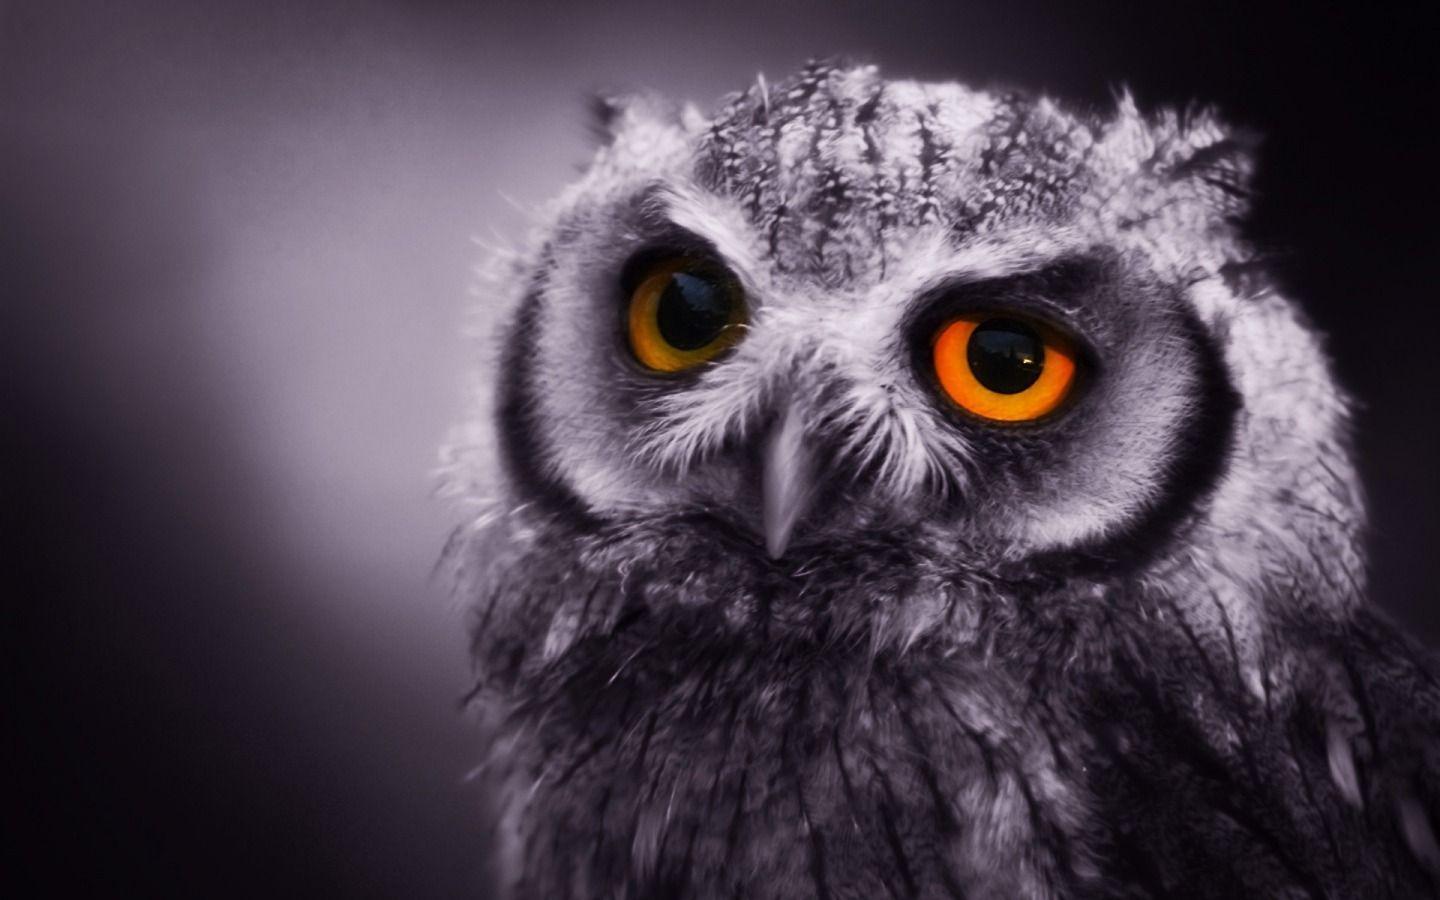 A selection of 10 Image of Owl in HD quality